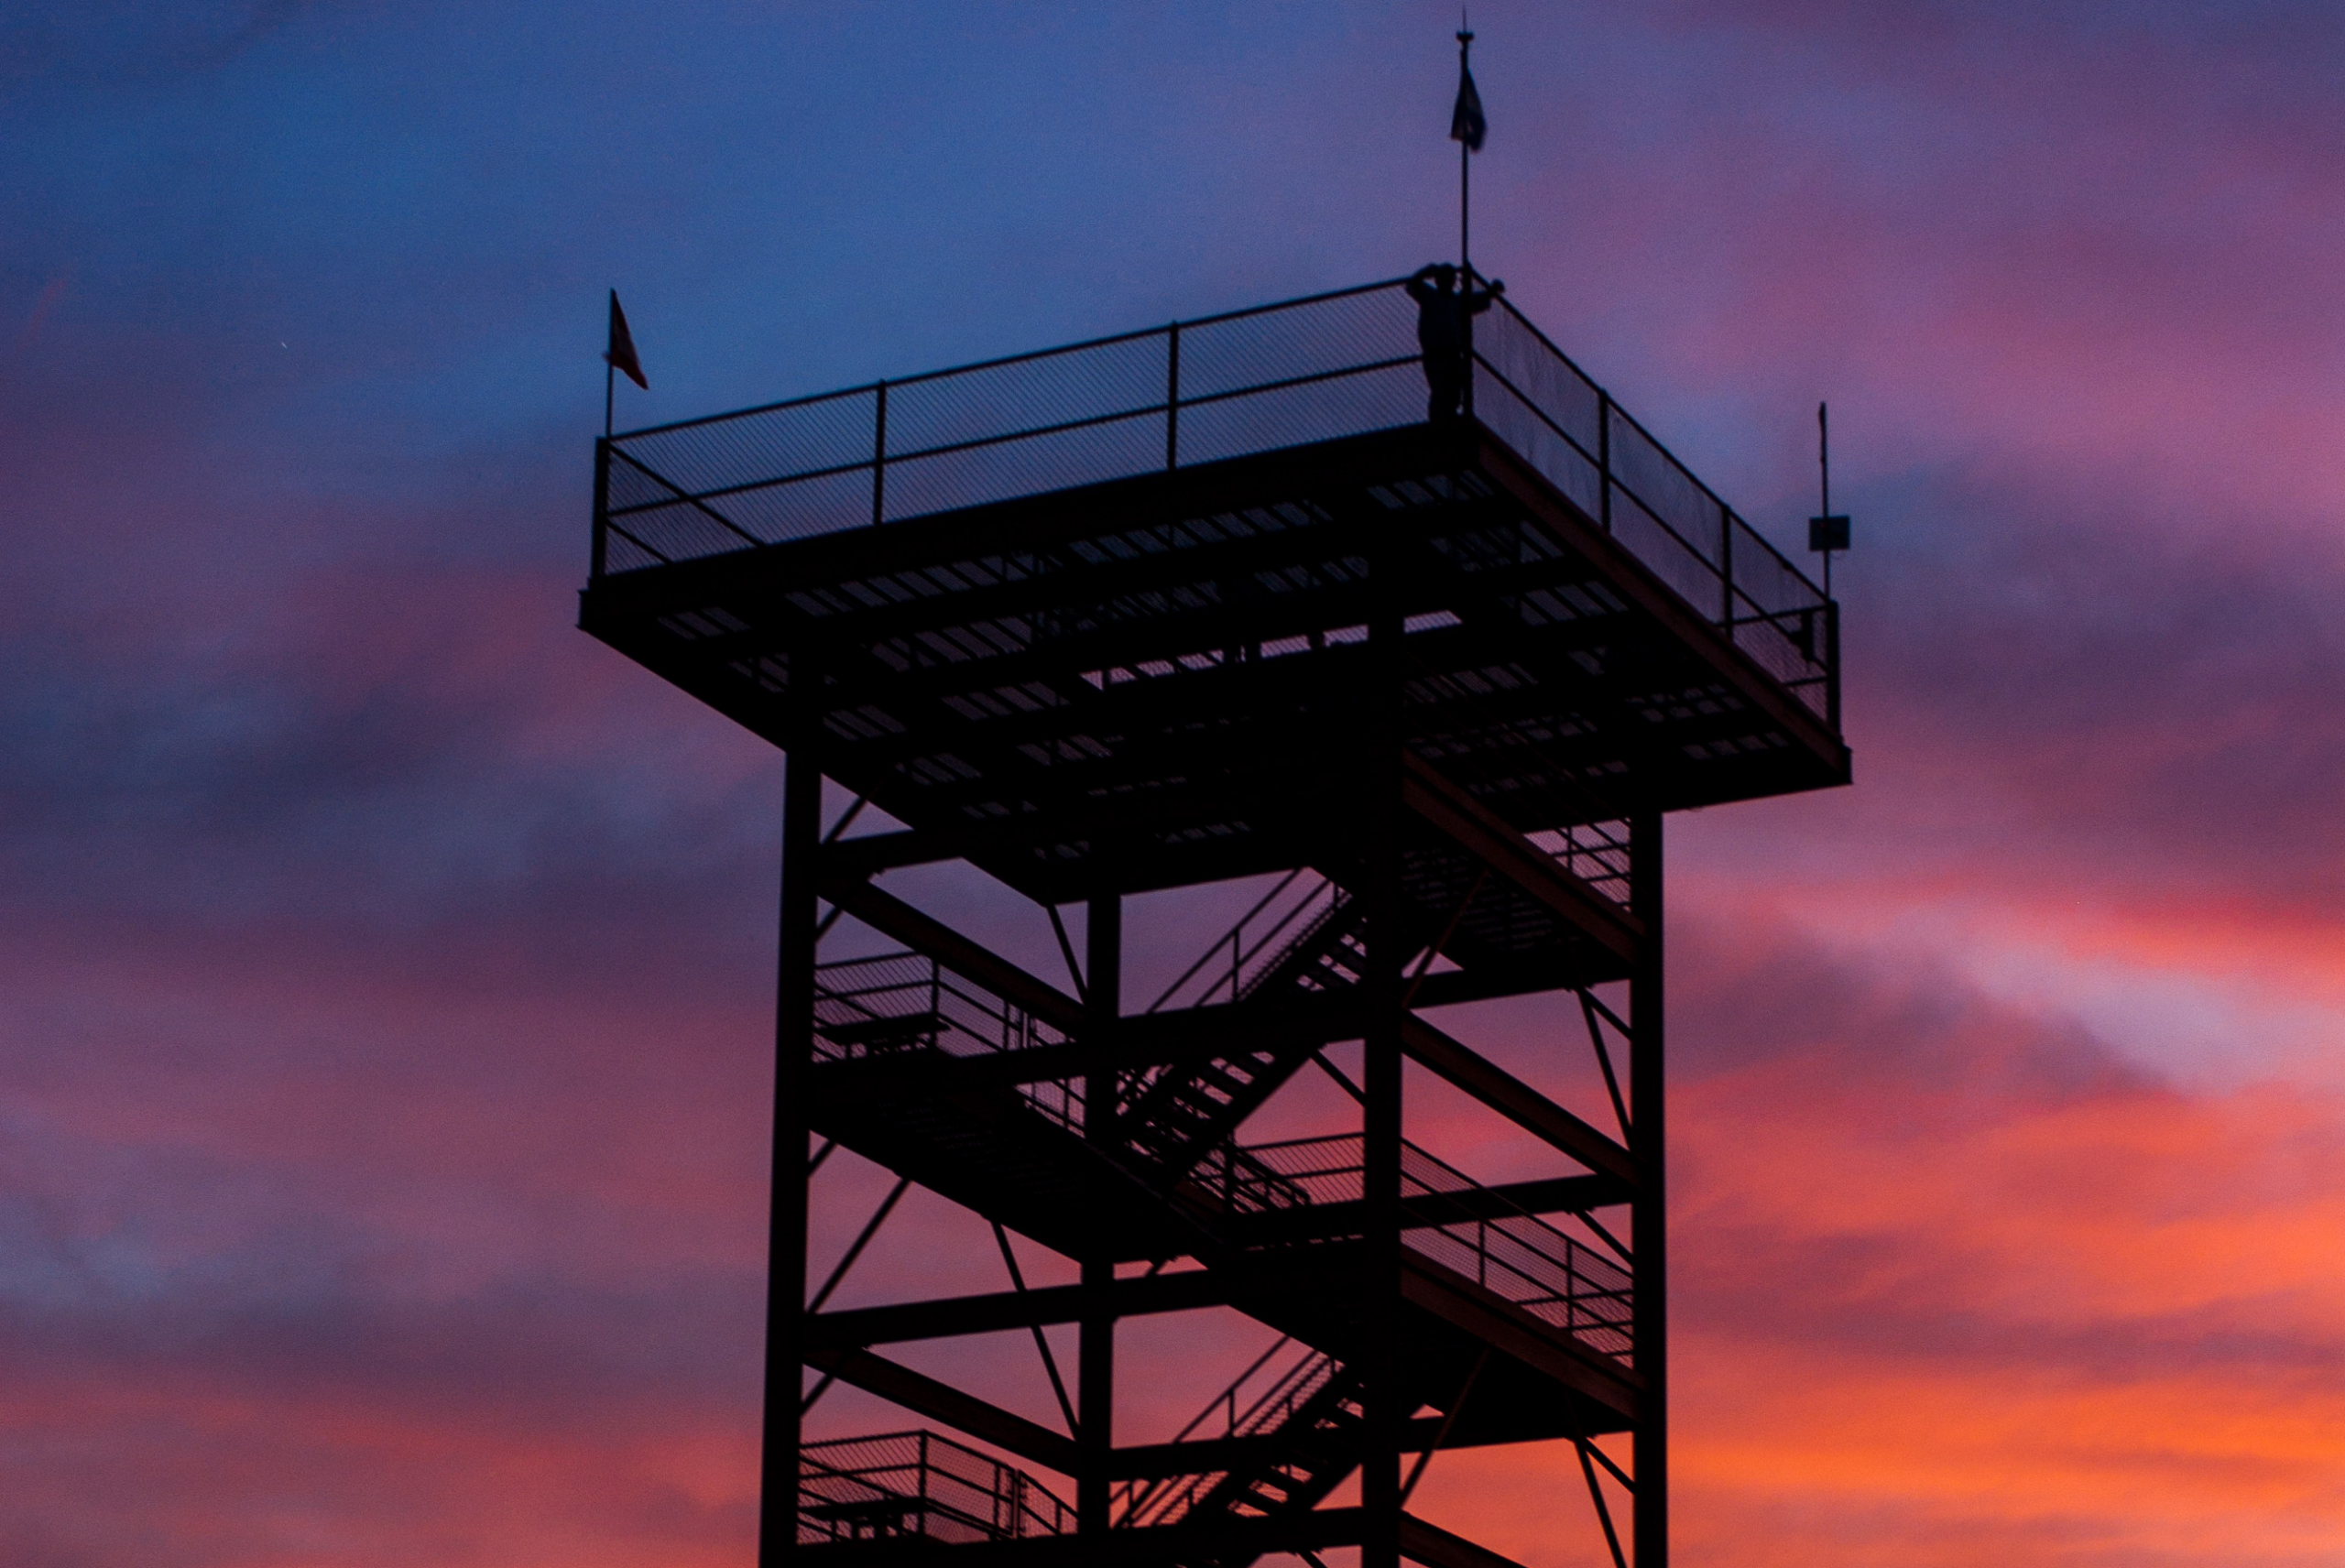 observation tower at sunset